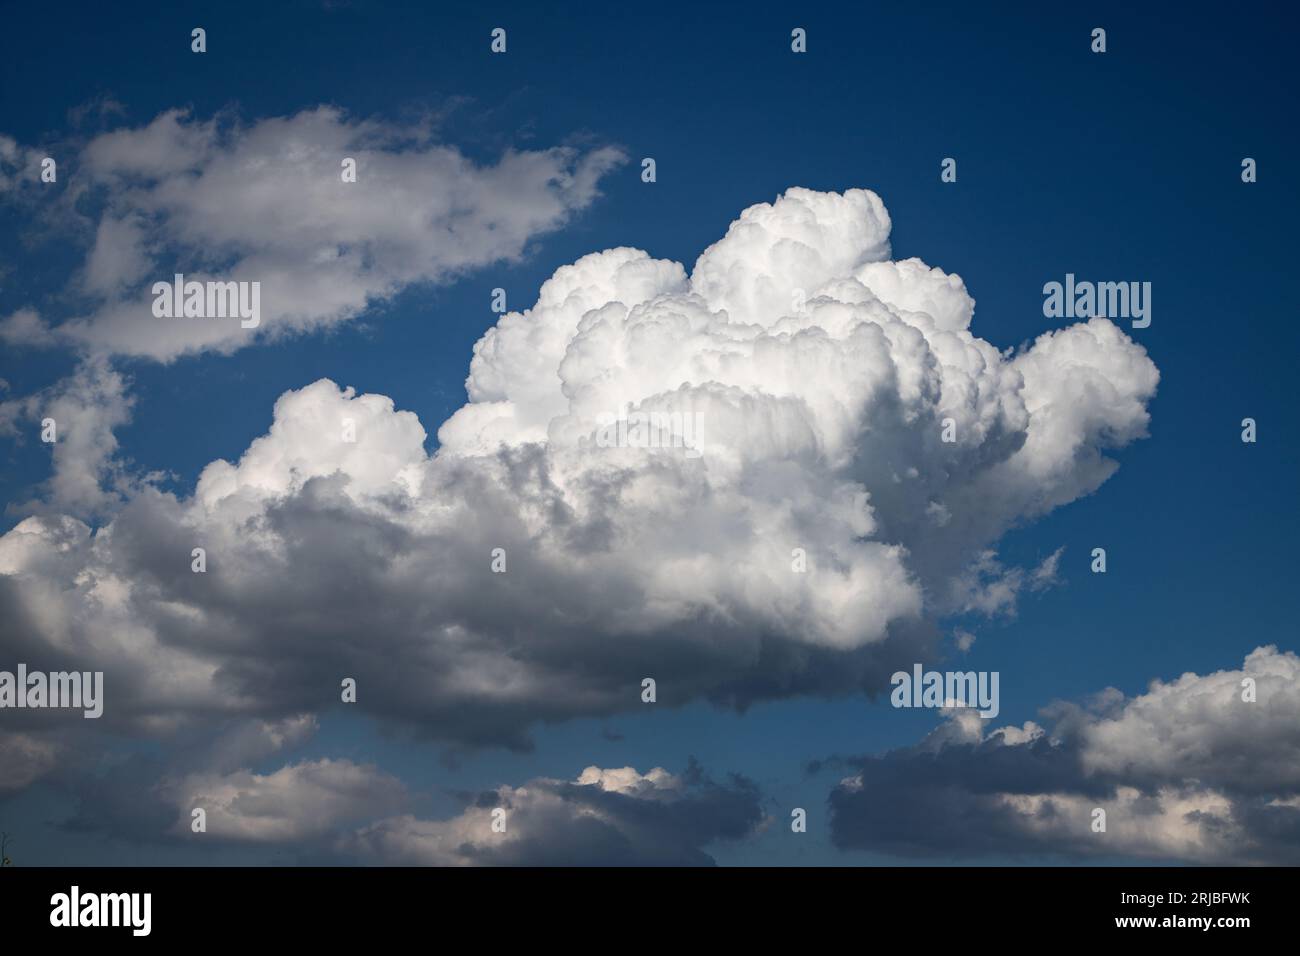 A white storm cloud looms ominously in the sky, heralding the approach of a tempes Stock Photo